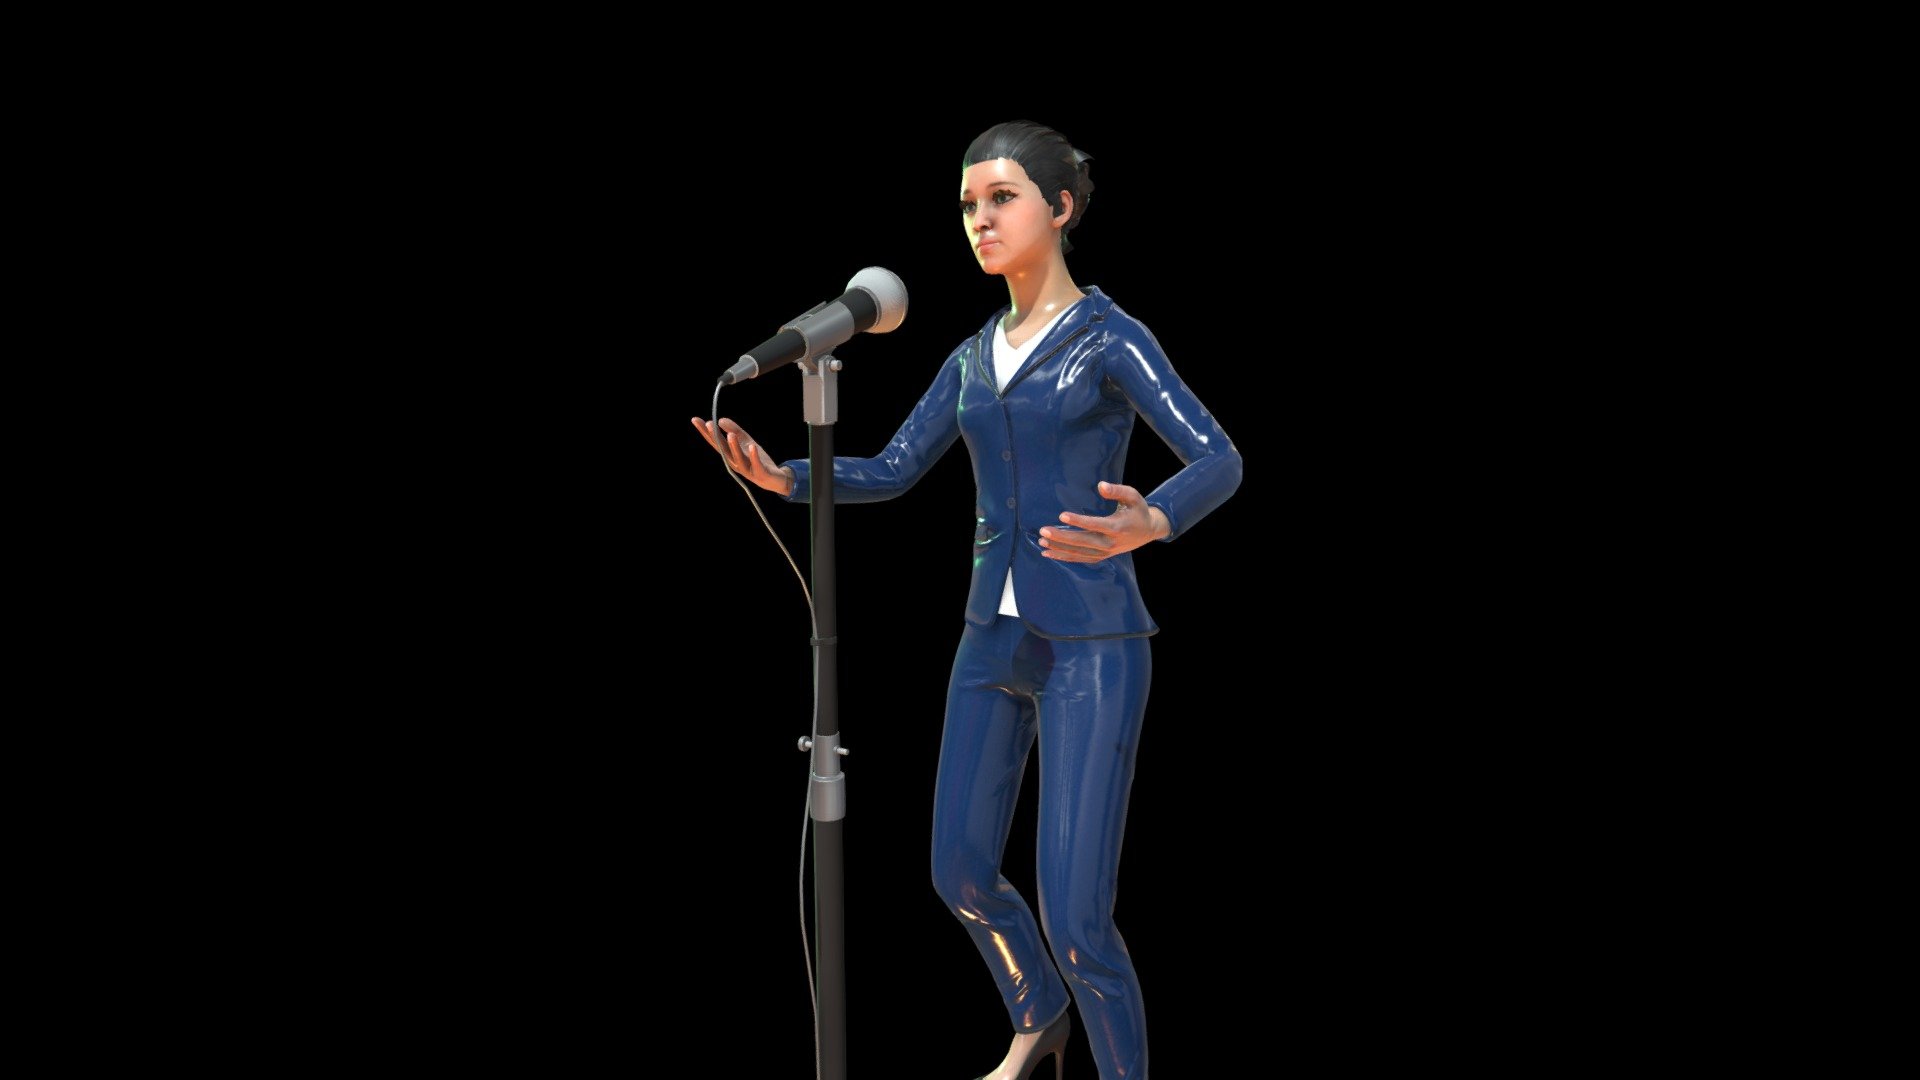 An Animated Patricia Allison Avatar Character Loop of stand up comedy with microphone. 78 seconds in duration, or 1:18.

Patricia Allison (born 7 December 1994) is an English actress. Following a string of guest appearances on television, she landed her first major role as Ola Nyman on the Netflix comedy-drama series Sex Education. At the age of ten, she appeared in a production of Oliver Twist at the Royal Opera House. After leaving school, she studied musical theatre for two years at the Colchester Institute, followed by a four-year course at the East 15 Acting School in Loughton, Essex where she graduated with a Bachelor of Arts in Acting. In 2018, Allison played a minor role as Marguerite in the BBC miniseries Les Misérables, before being introduced as Ola Nyman in the Netflix comedy-drama series Sex Education in 2019. In 2020, her role was promoted to a main character 3d model